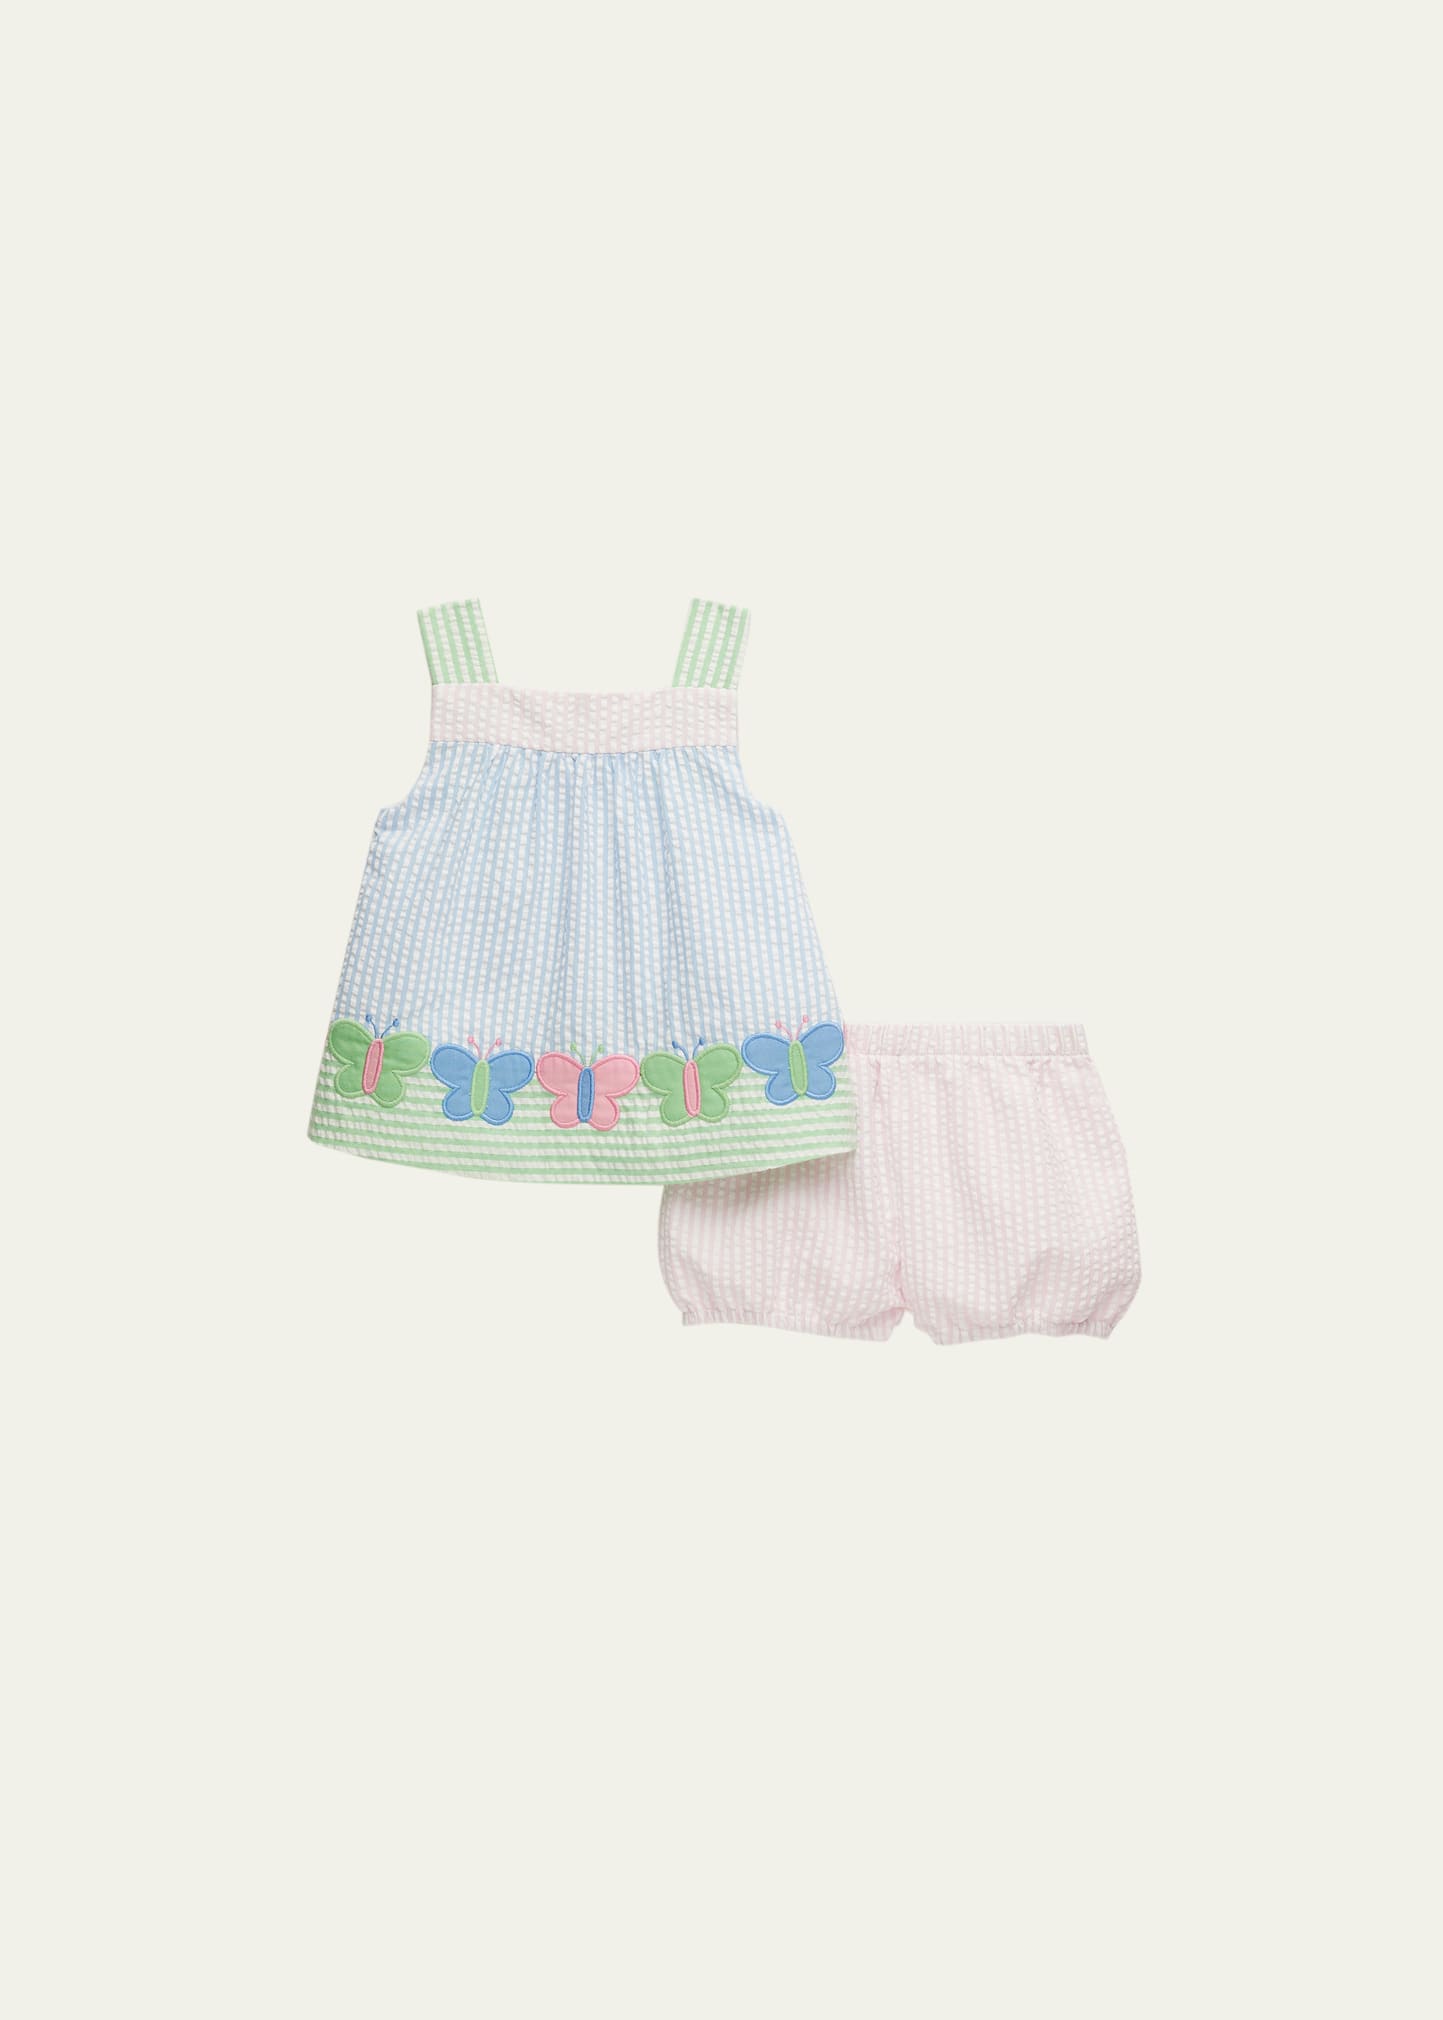 Florence Eiseman Babies' Girl's Embroidered Seersucker Striped Dress W/ Bloomers In Multi